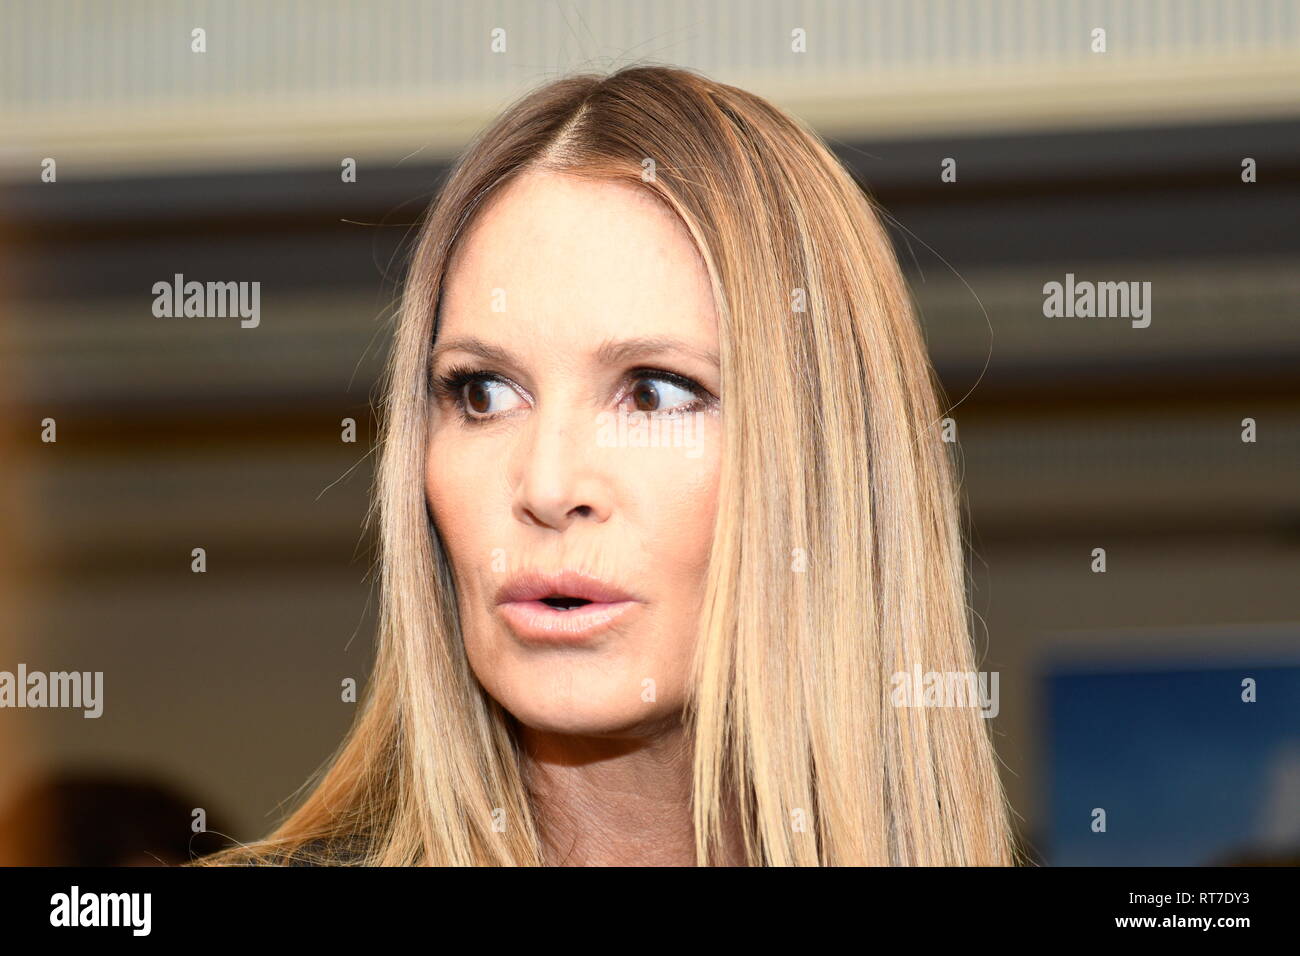 Vienna, Austria. 28th Feb, 2019. This year's opera ball guest of architect Richard Lugner is the former supermodel Elle Macpherson(The Body). Photo session in evening dress for press in the Grand Hotel in Vienna. Picture shows Elle Macpherson. Credit: Franz Perc/Alamy Live News Stock Photo